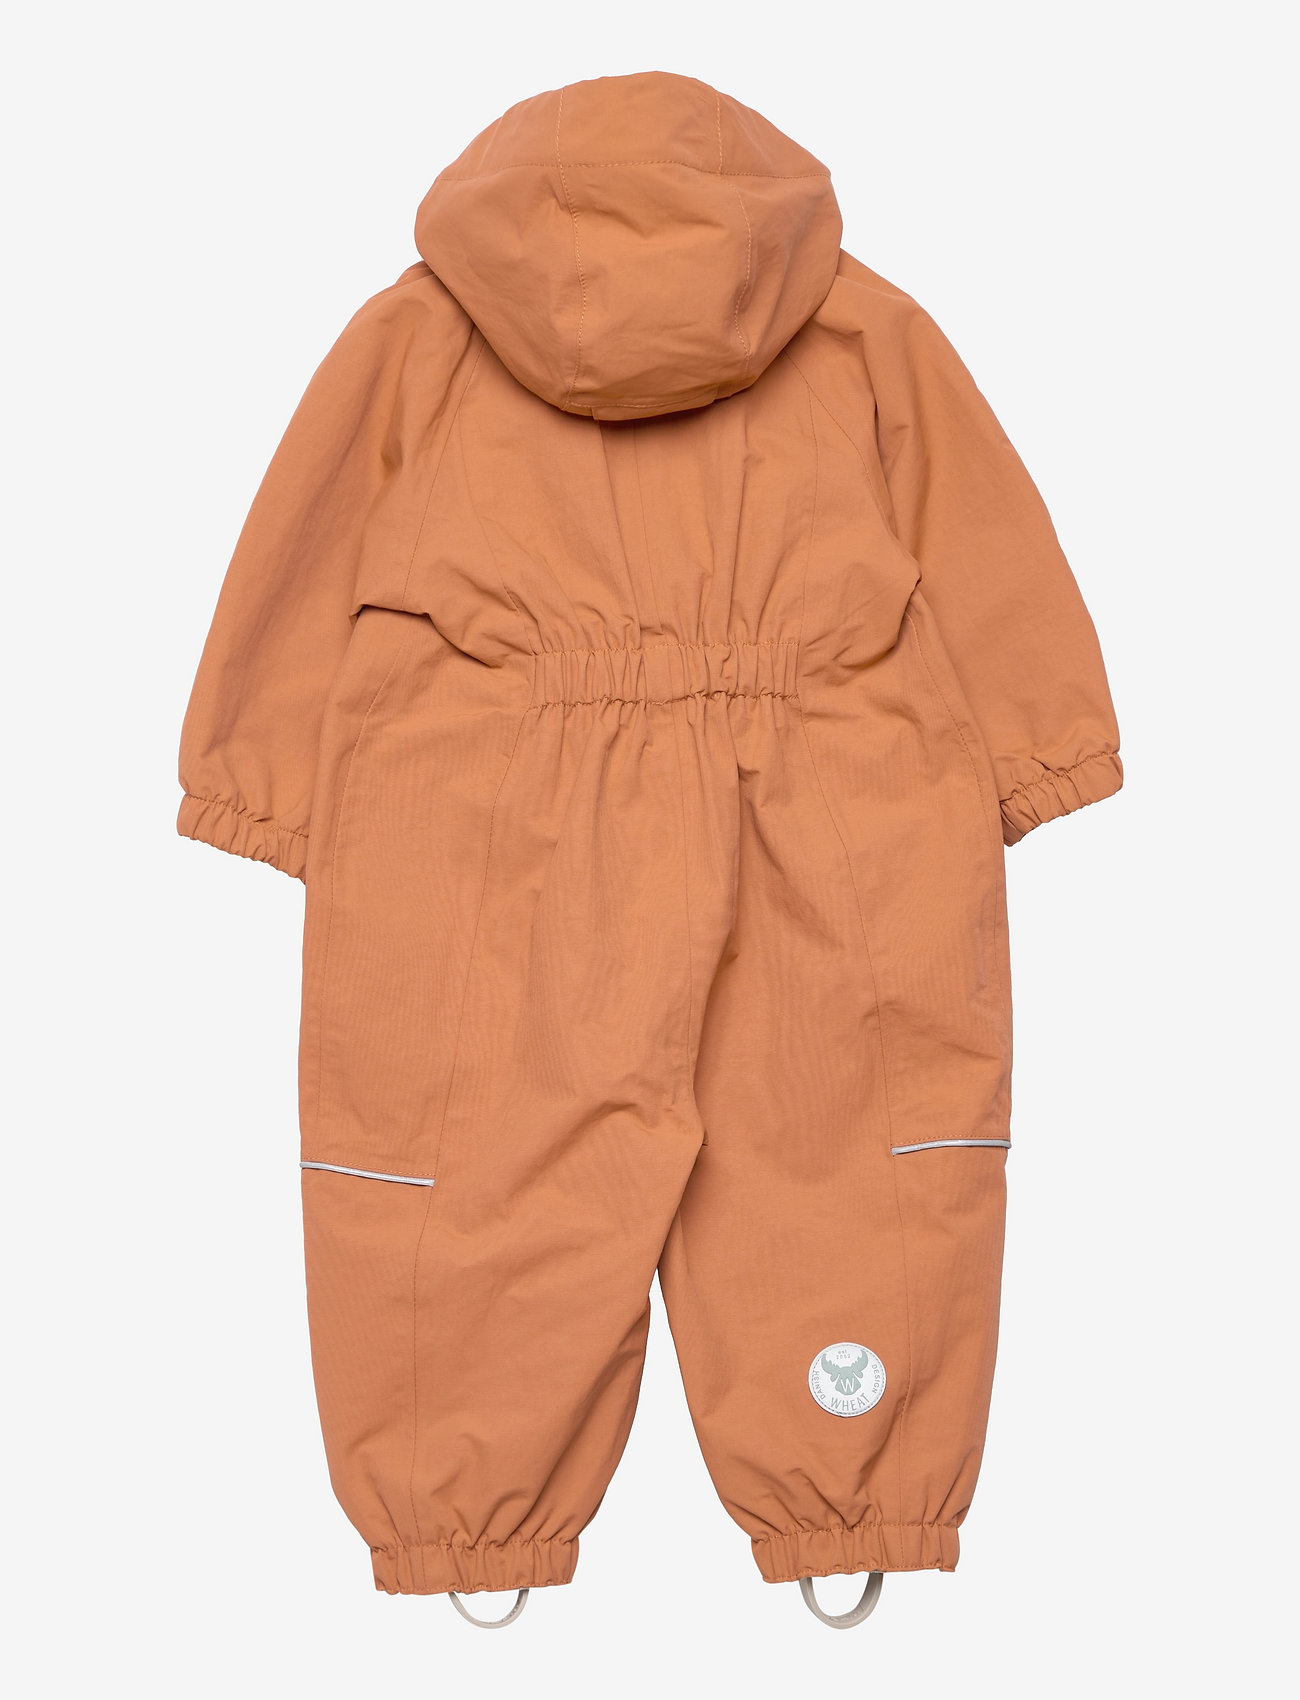 Wheat - Outdoor suit Olly Tech - combinaisons de travail - amber brown - 1